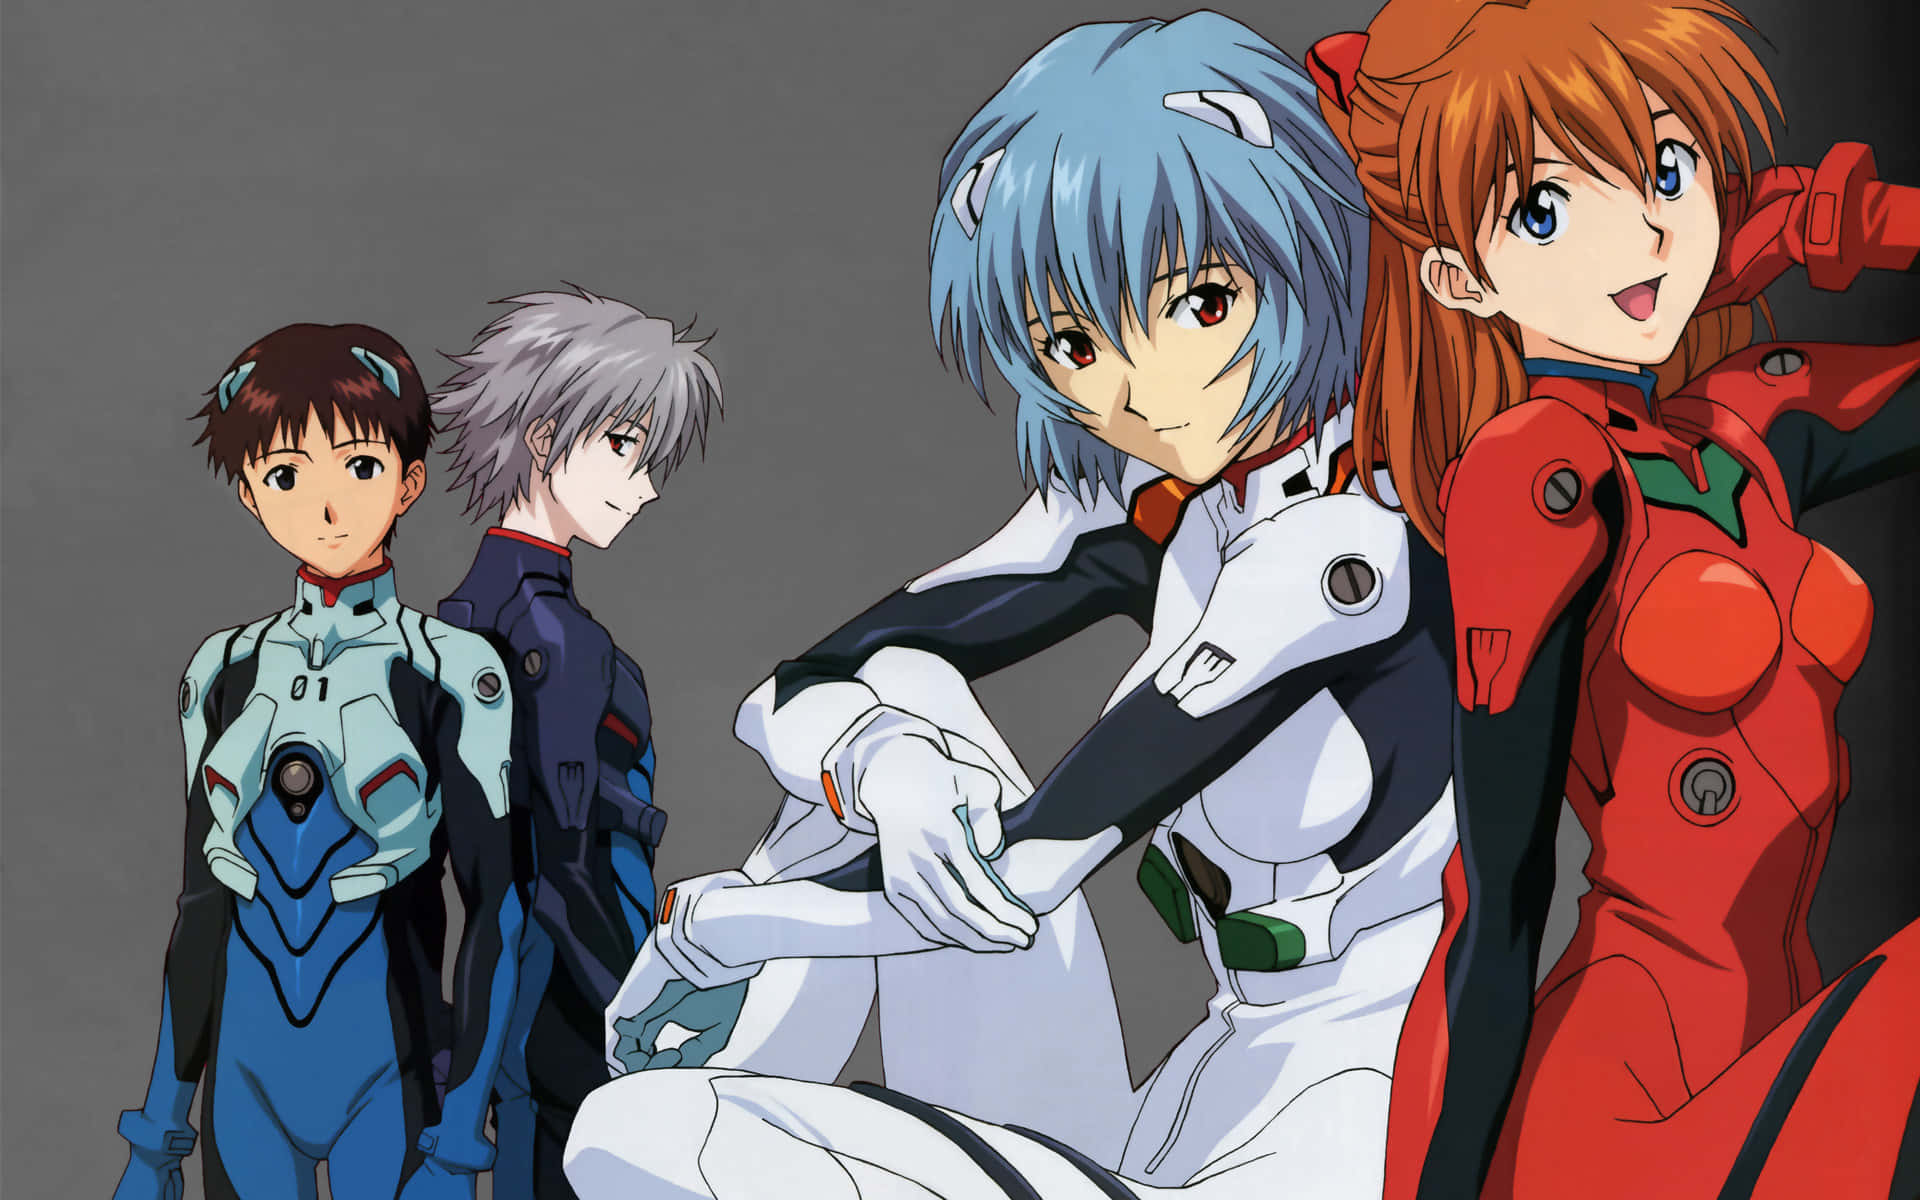 Asuka and Shinji, two of the most beloved characters of Neon Genesis Evangelion.